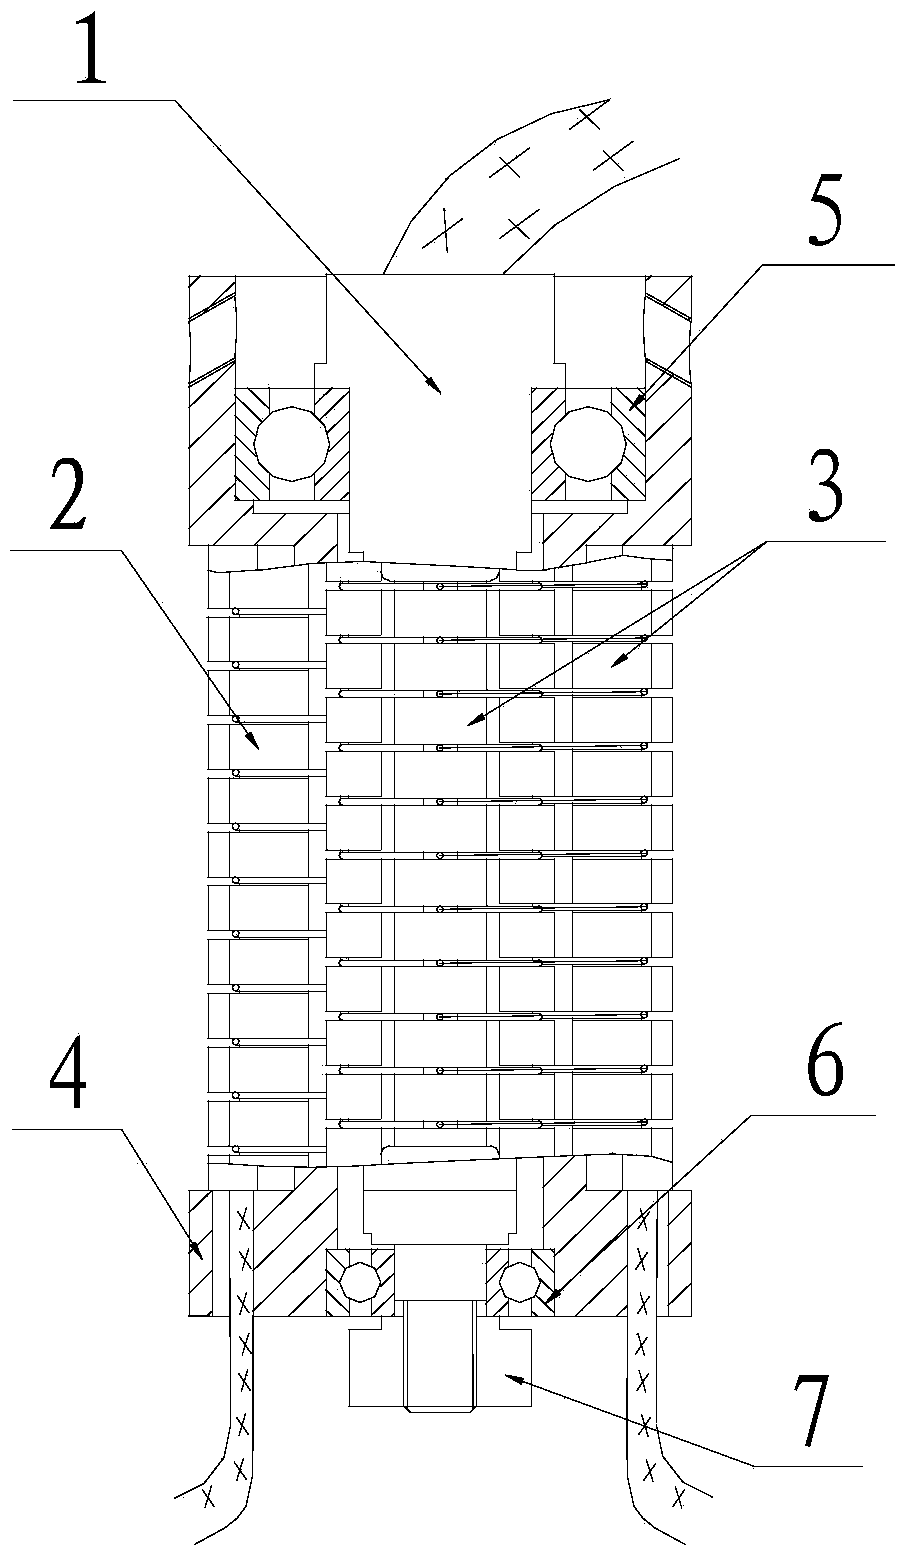 Rotating multi-channel power transmission device